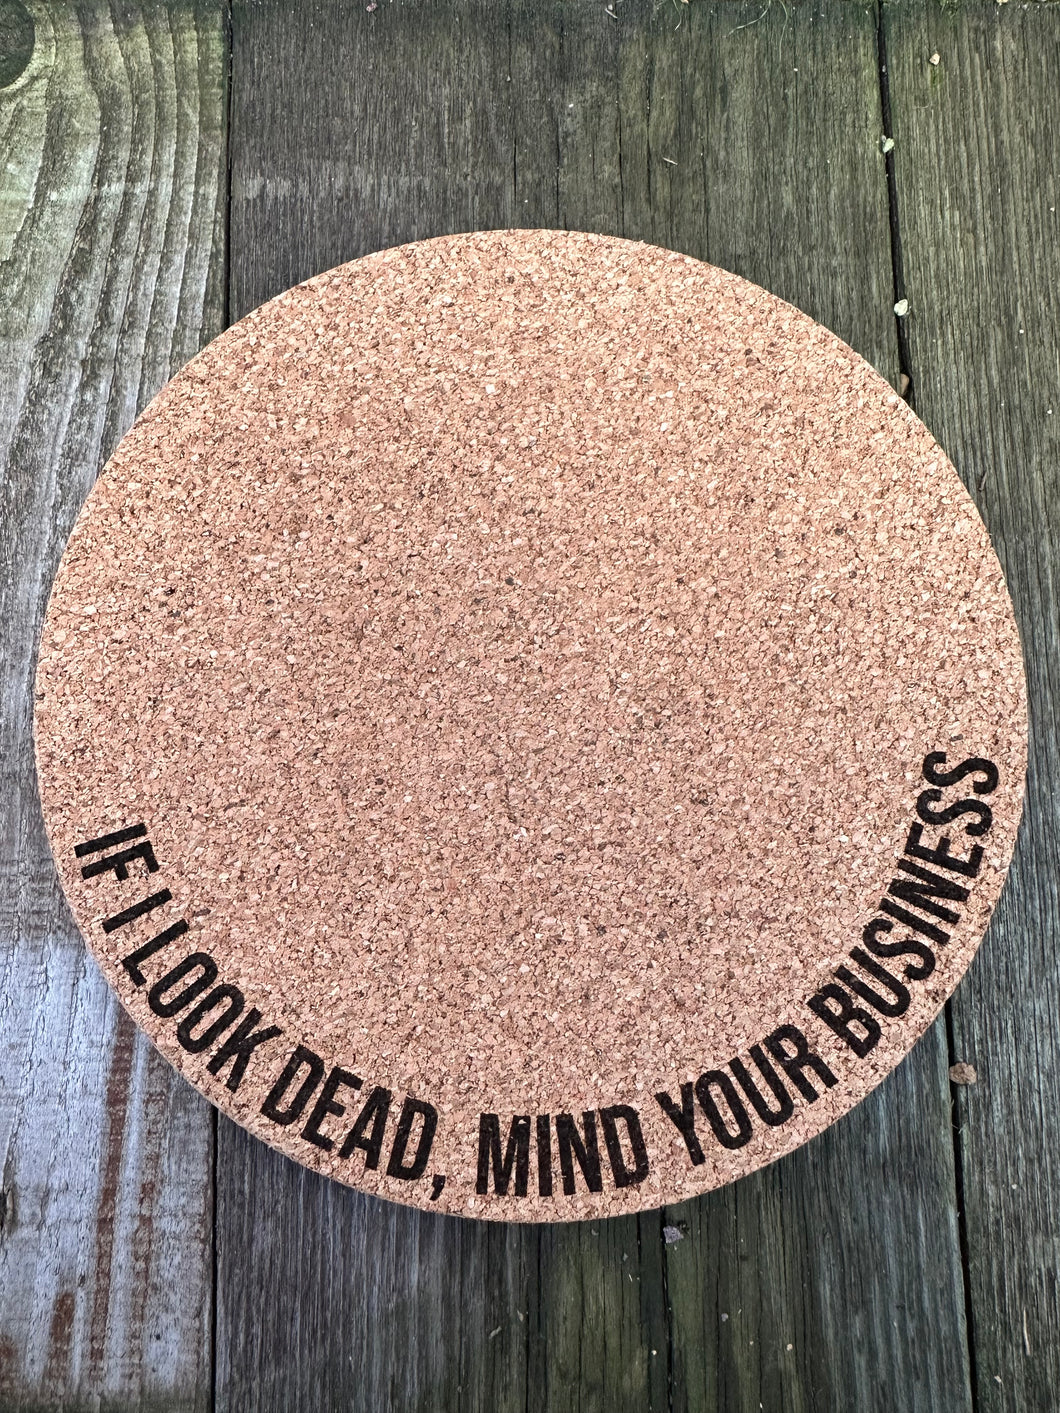 If I Look Dead, Mind Your Business Cork Plant Mat - Engraved Cork Round - Cork Bottom - No Plastic or Rubber - All Natural Material